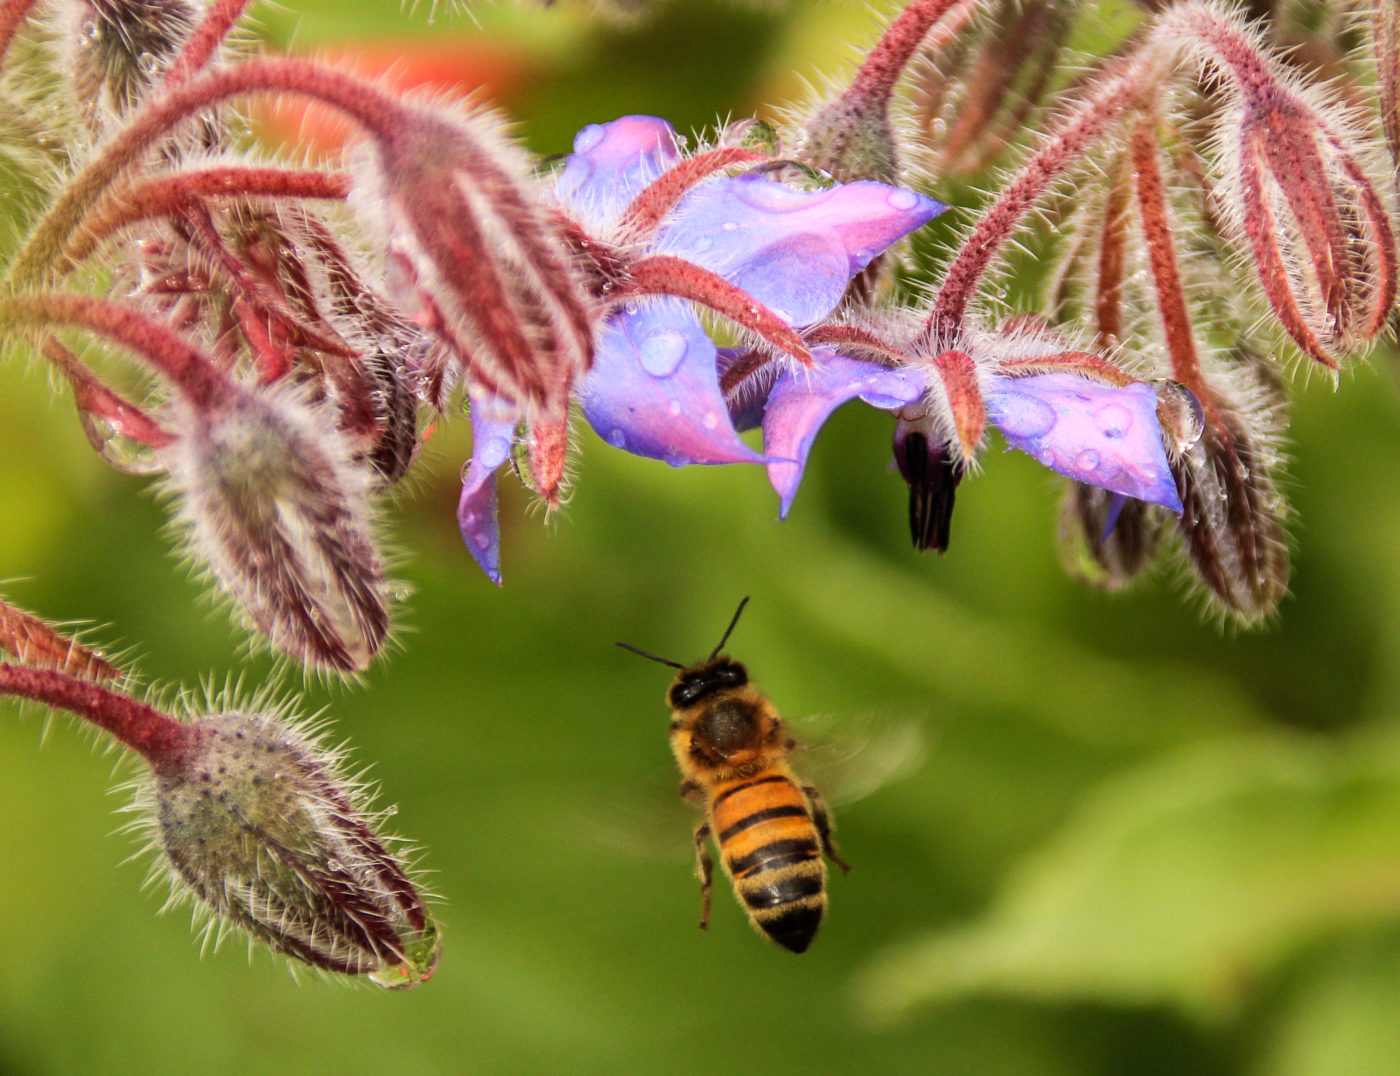 Bee flying near purple flowers and buds